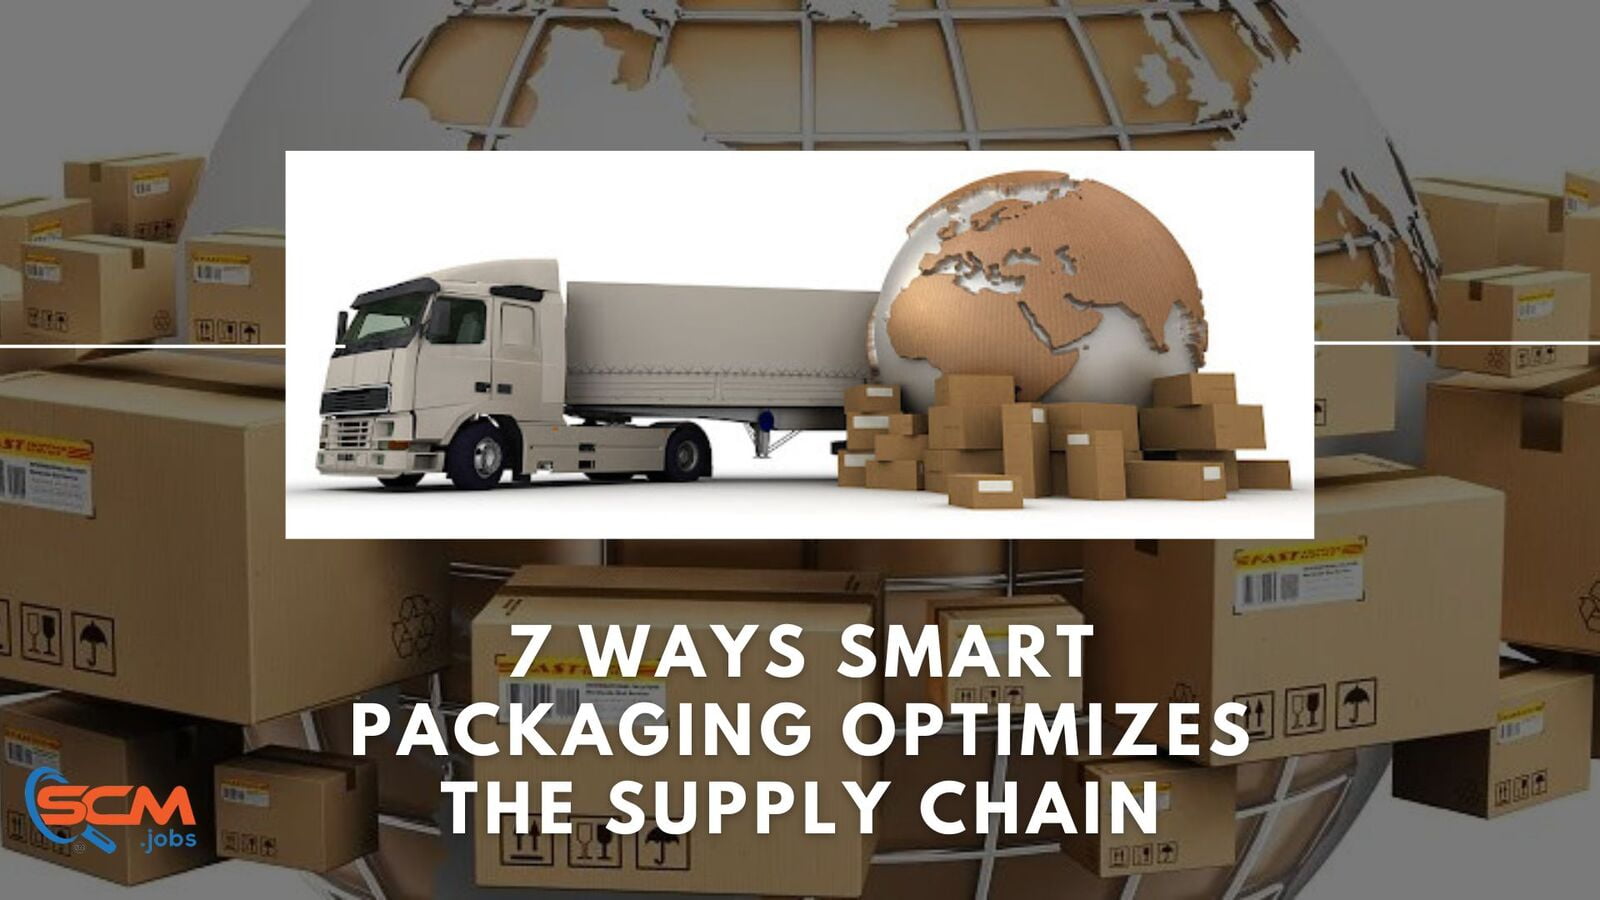 7 Ways Smart Packaging Optimizes the Supply Chain